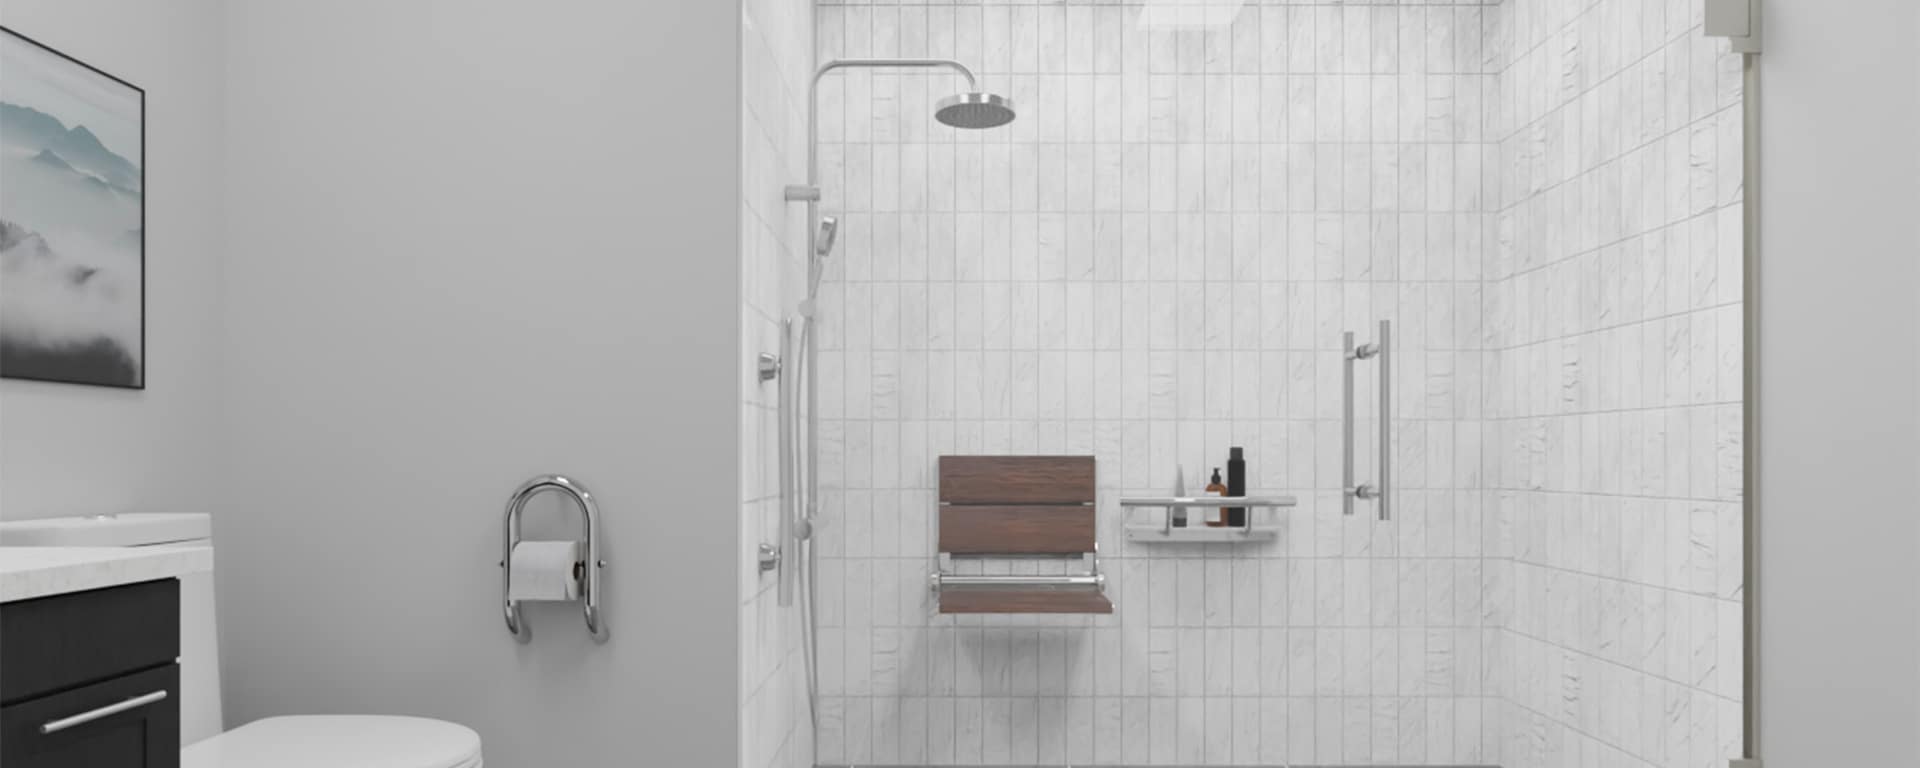 Shower with grab bars and 2 in 1 safety accessories.